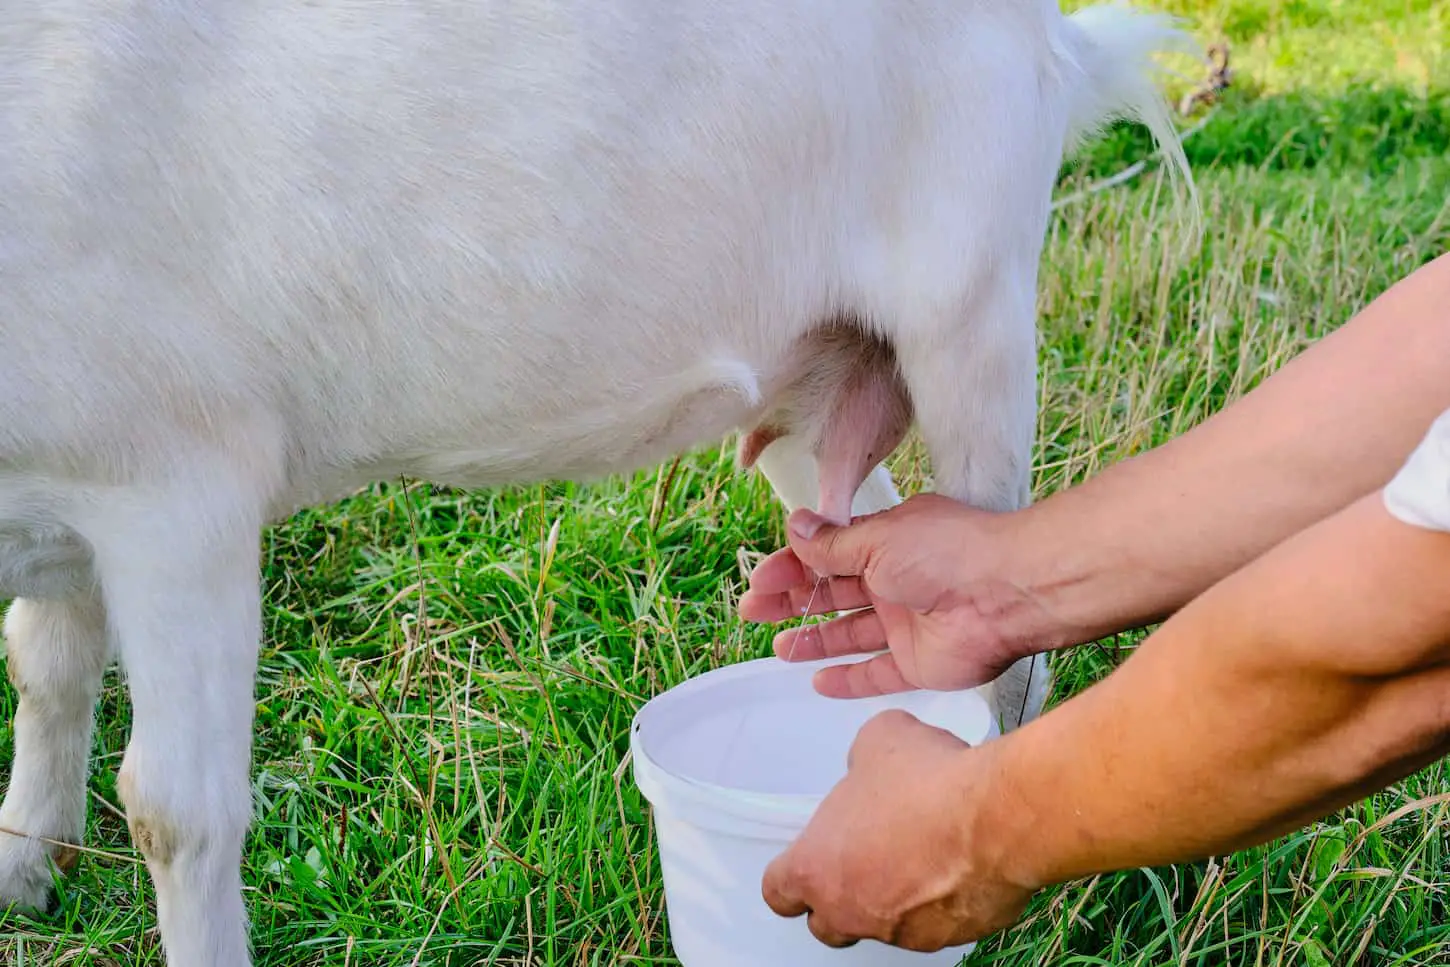 An image of the hands of a senior man milks a white goat on a meadow.